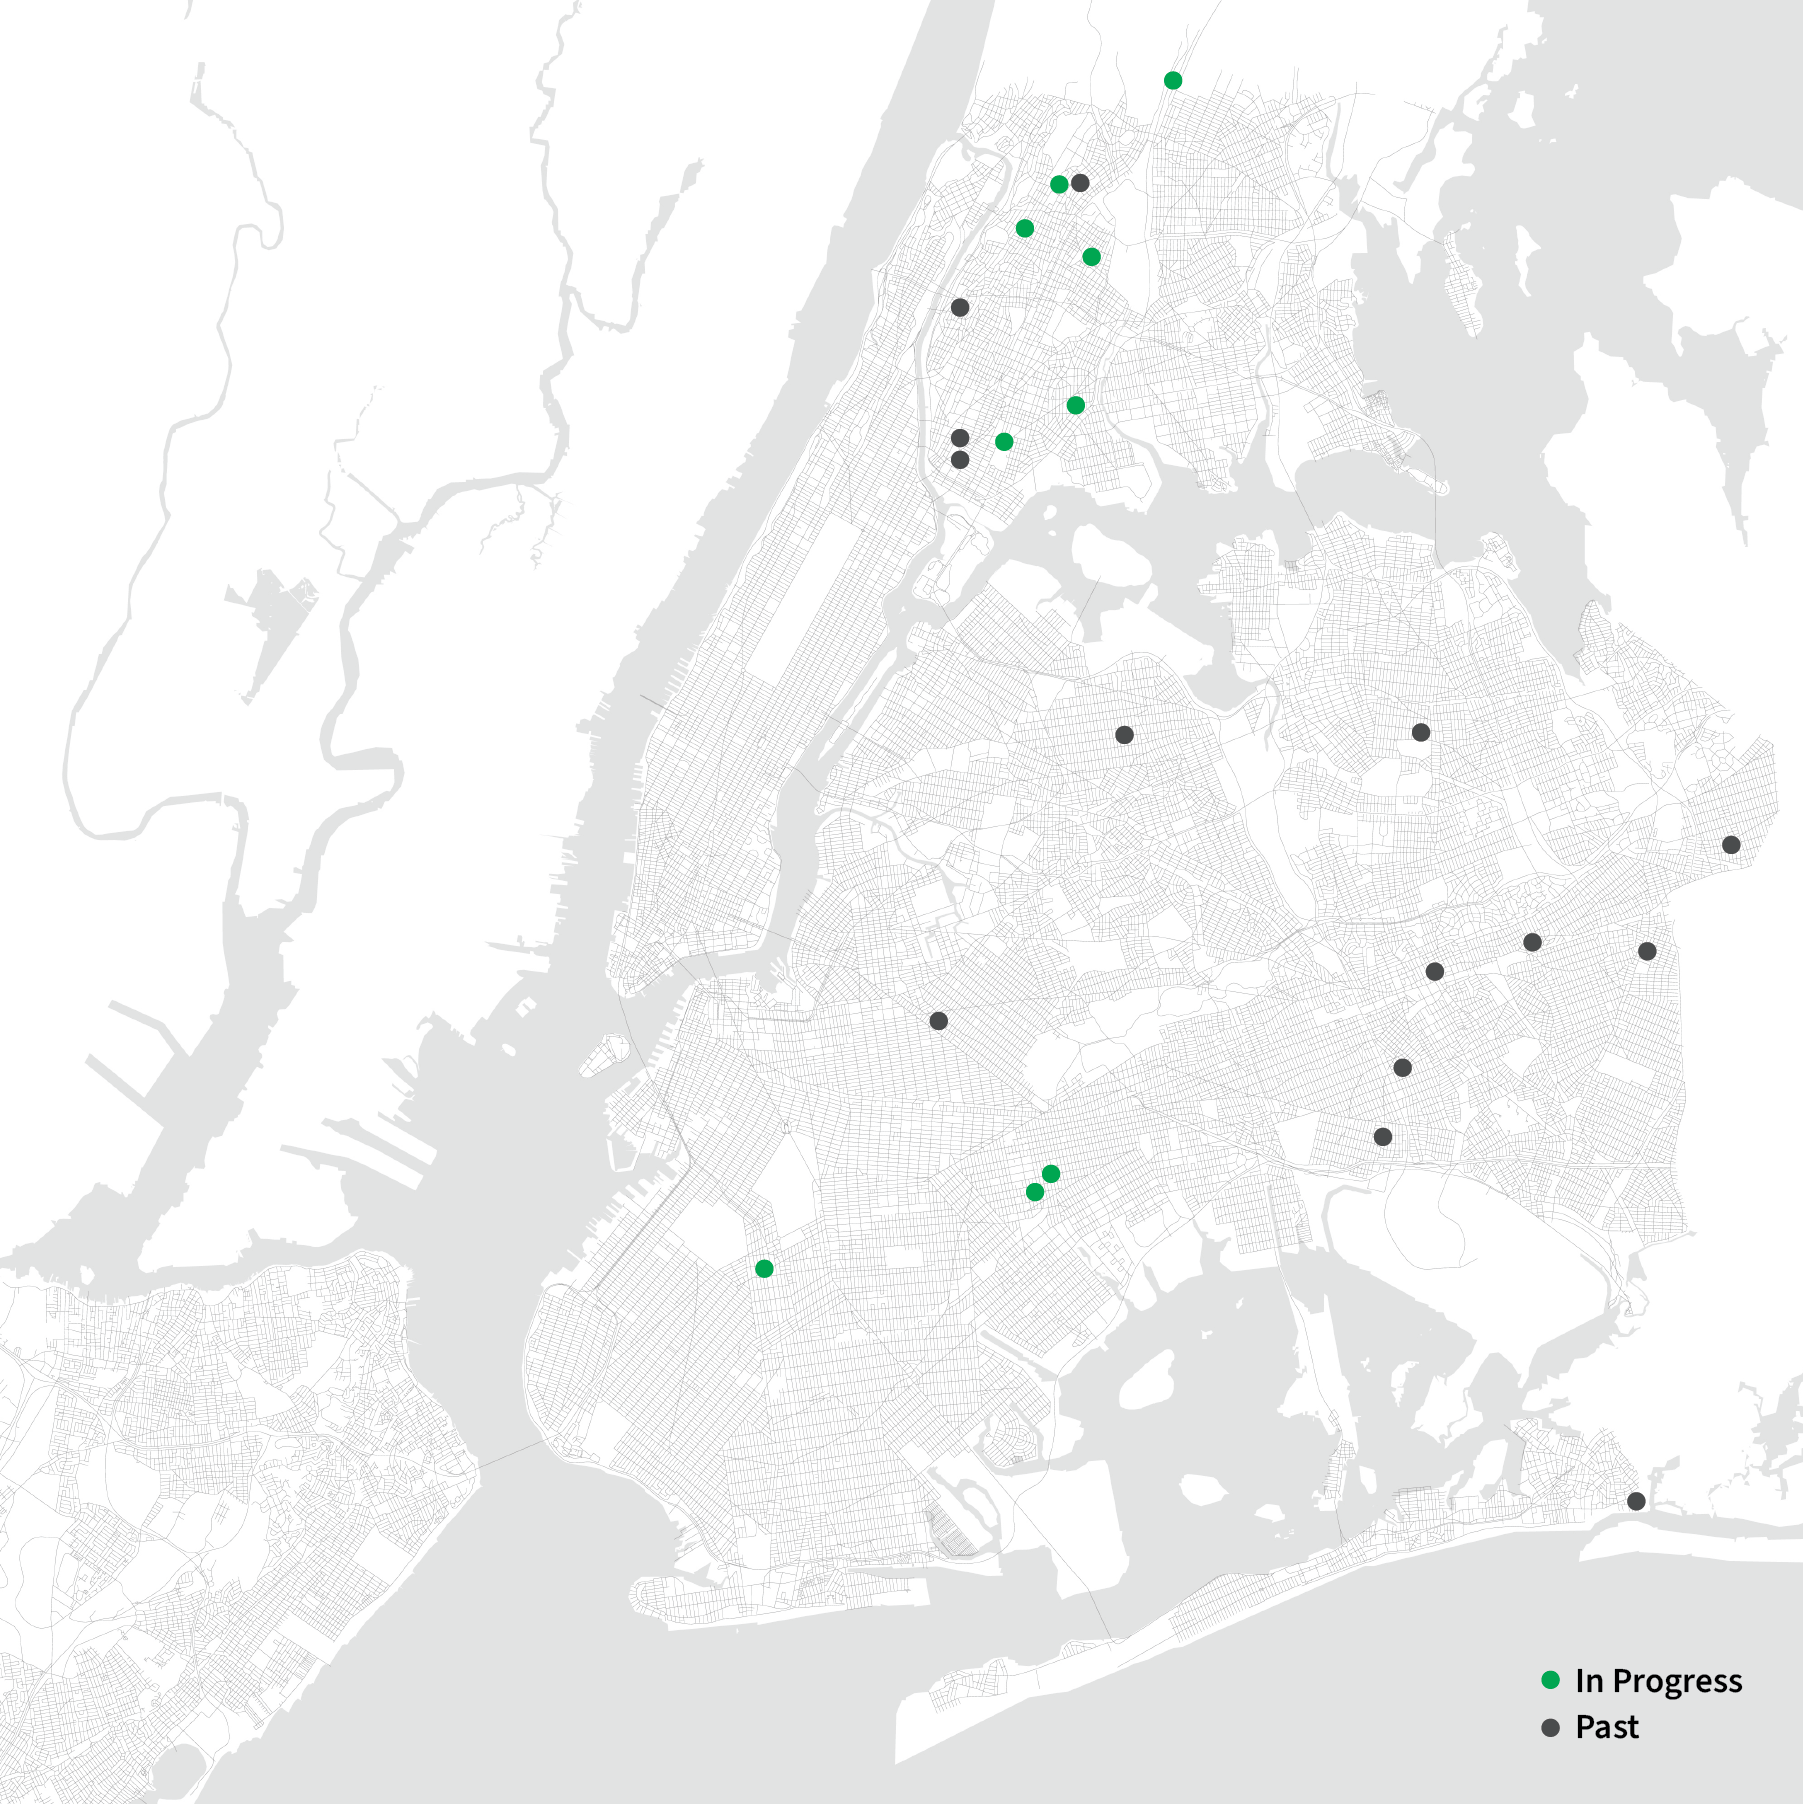 Map of NYC with green dots and black dots. The key indicates green dots are "In Progress" and black dots are "Previous."